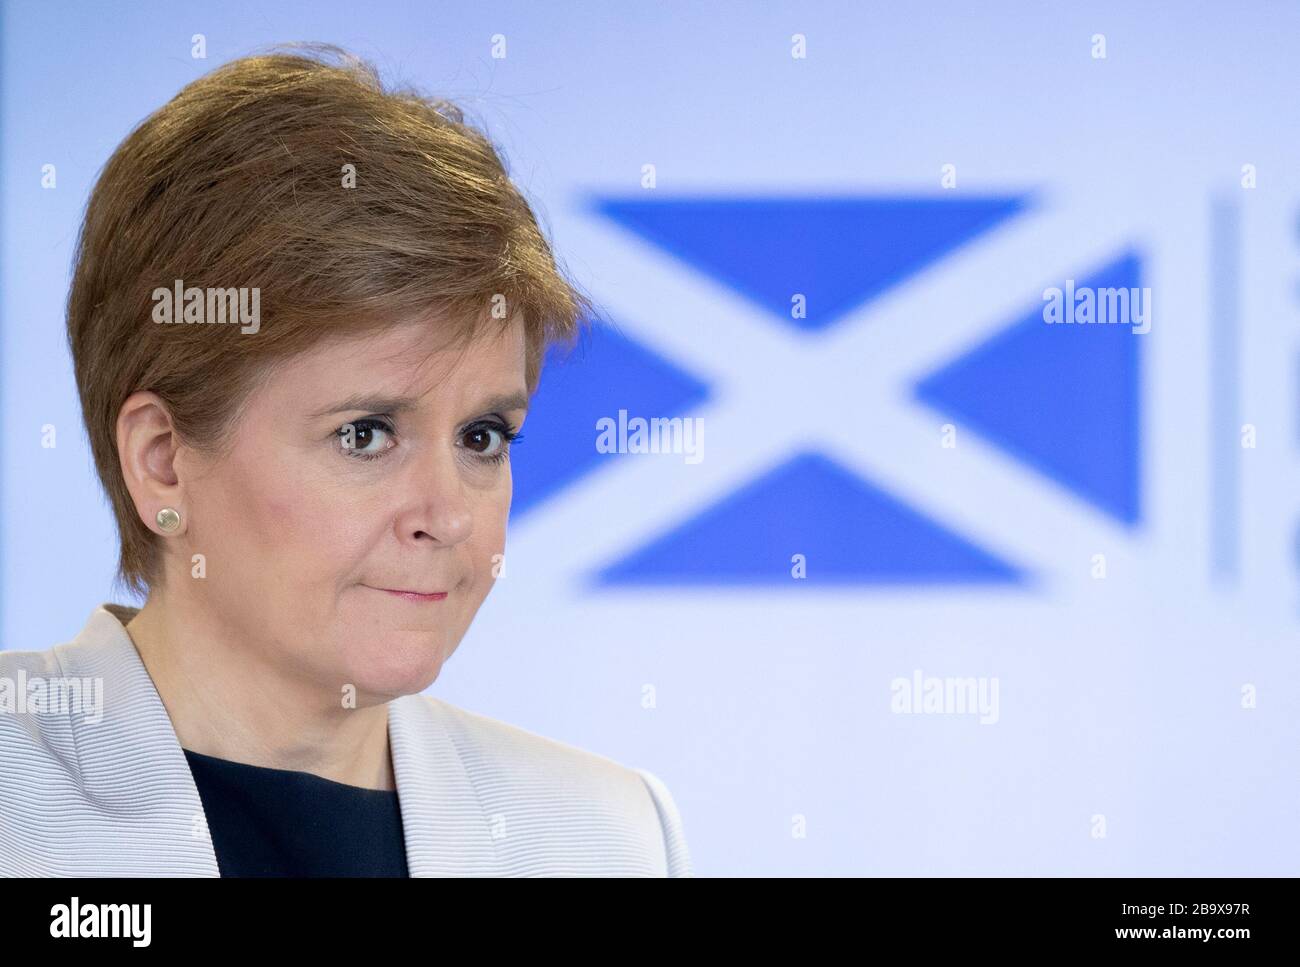 Scotland's First Minister Nicola Sturgeon holds a briefing on the coronavirus (COVID-19) outbreak at St Andrew's House, Edinburgh, after Prime Minister Boris Johnson has put the UK in lockdown to help curb the spread of the coronavirus. Stock Photo